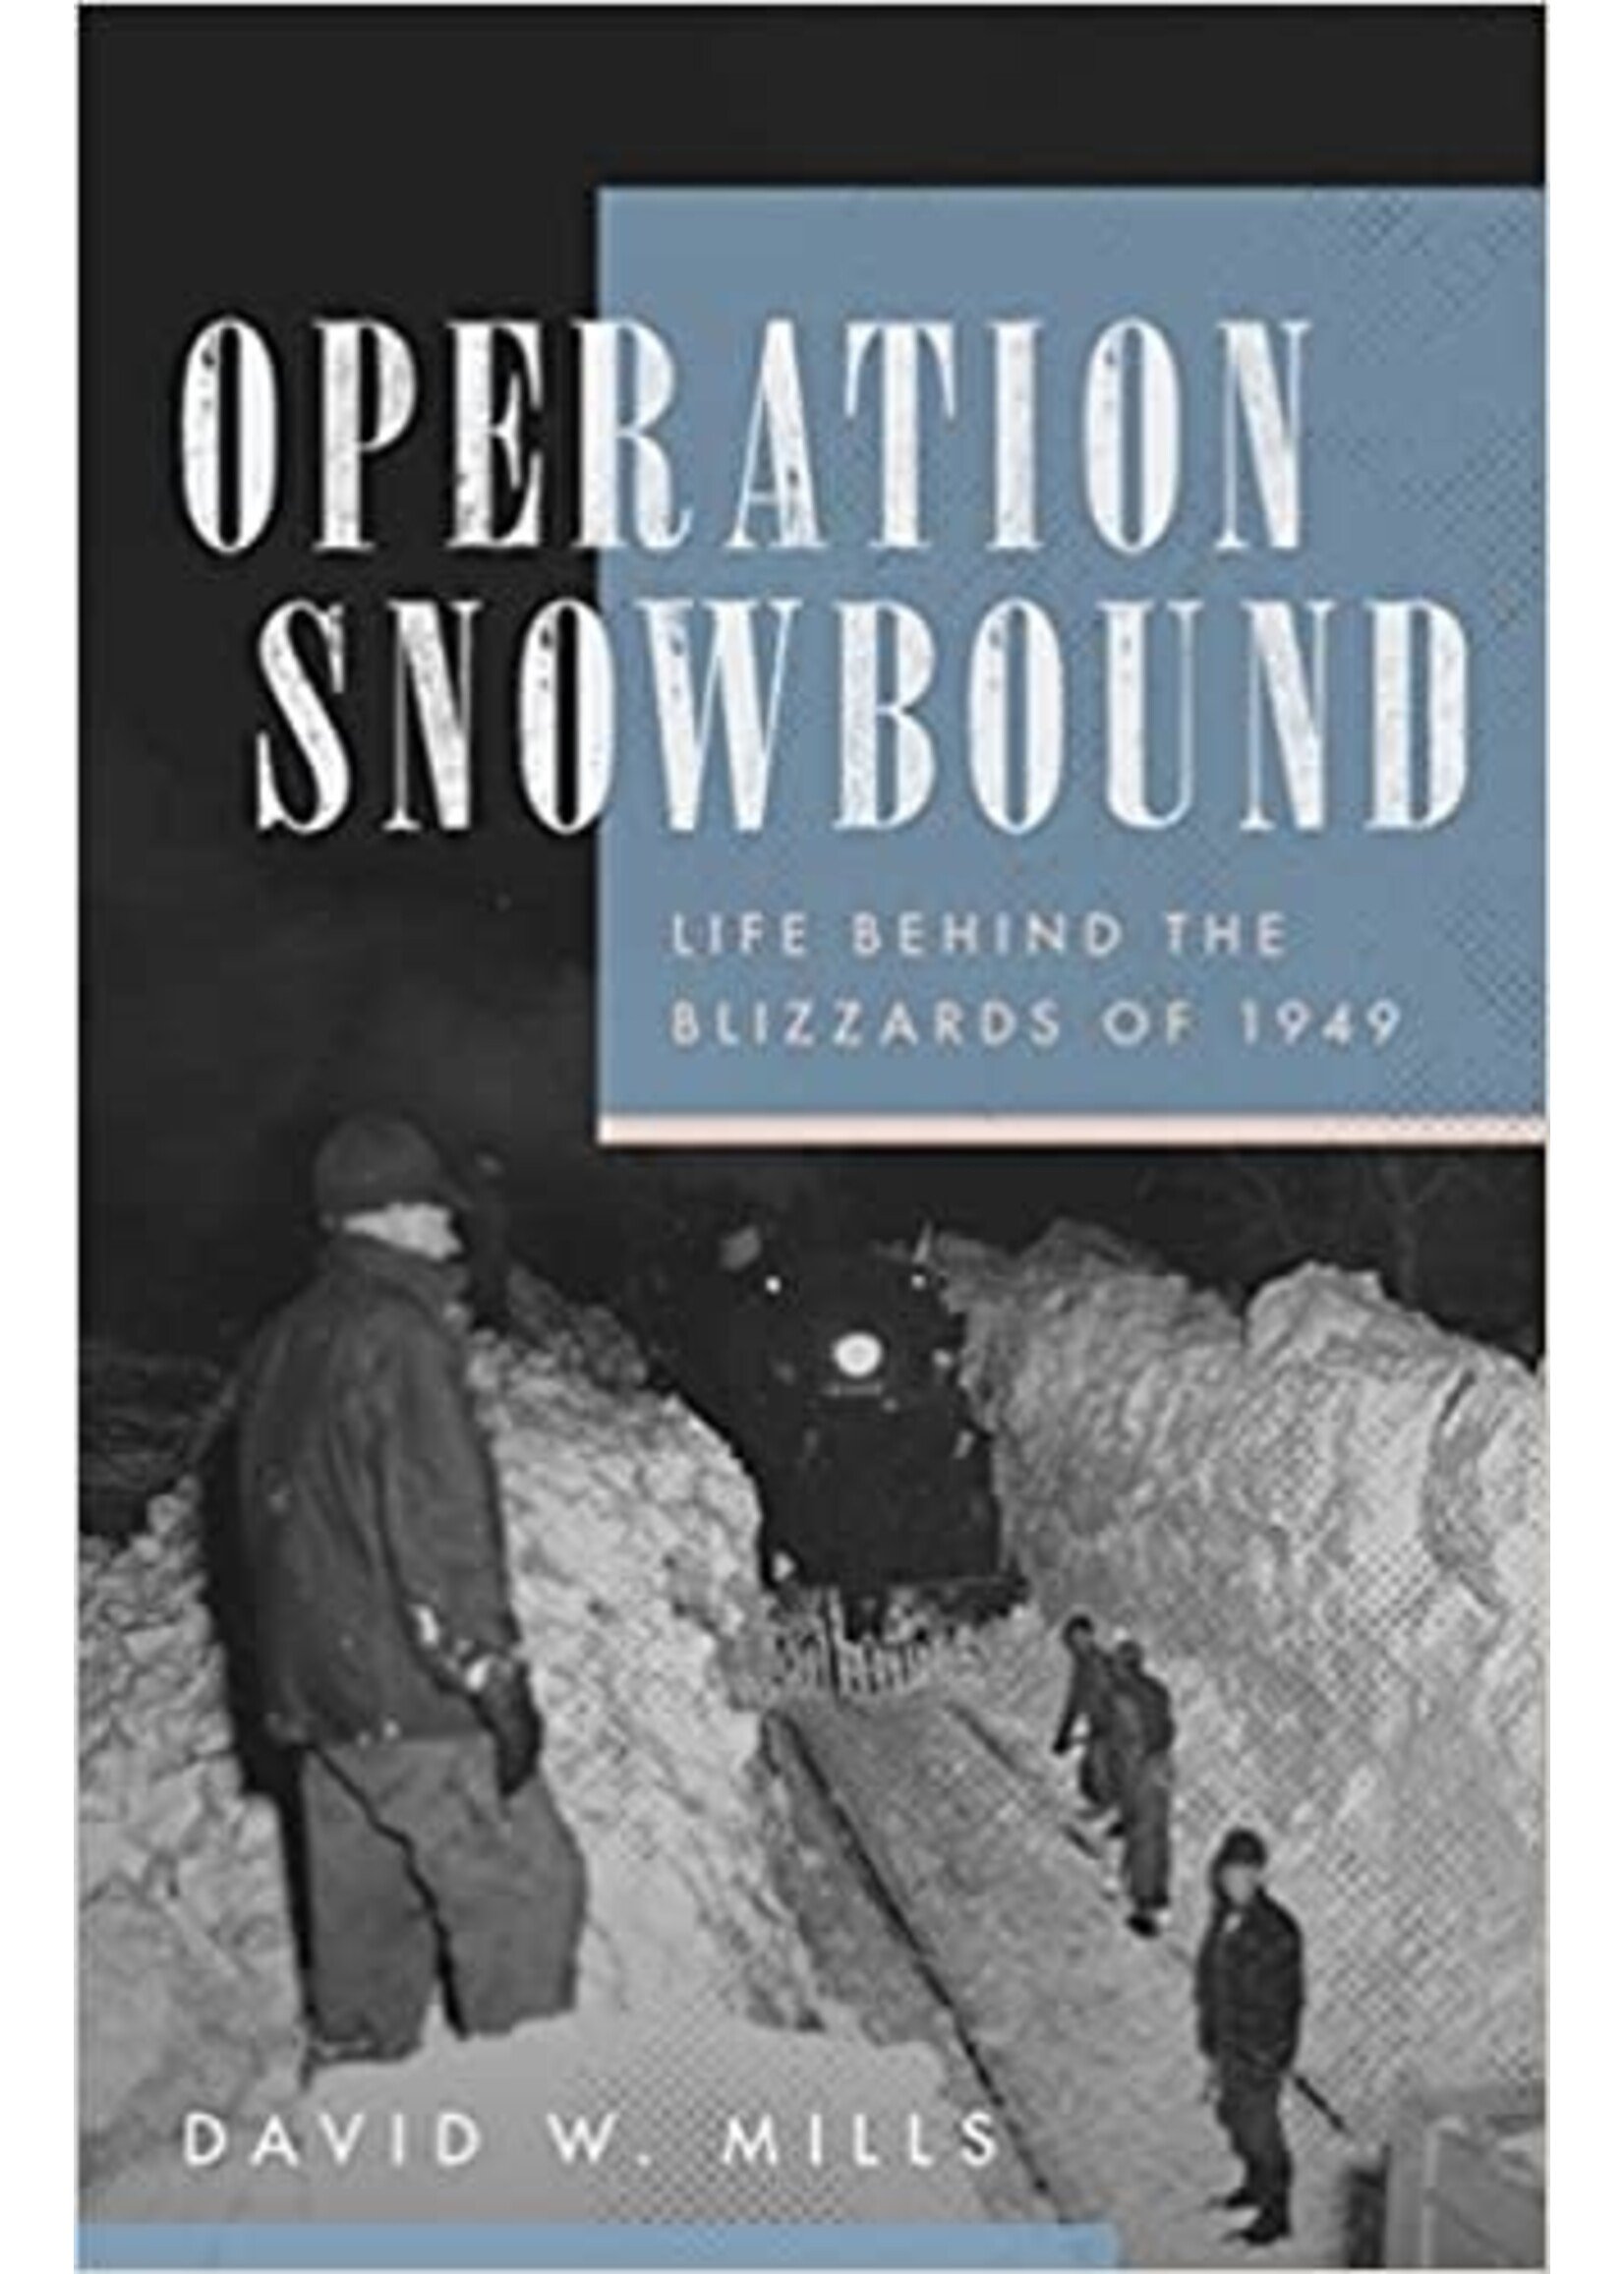 Operation Snowbound: Life behind the Blizzards of 1949